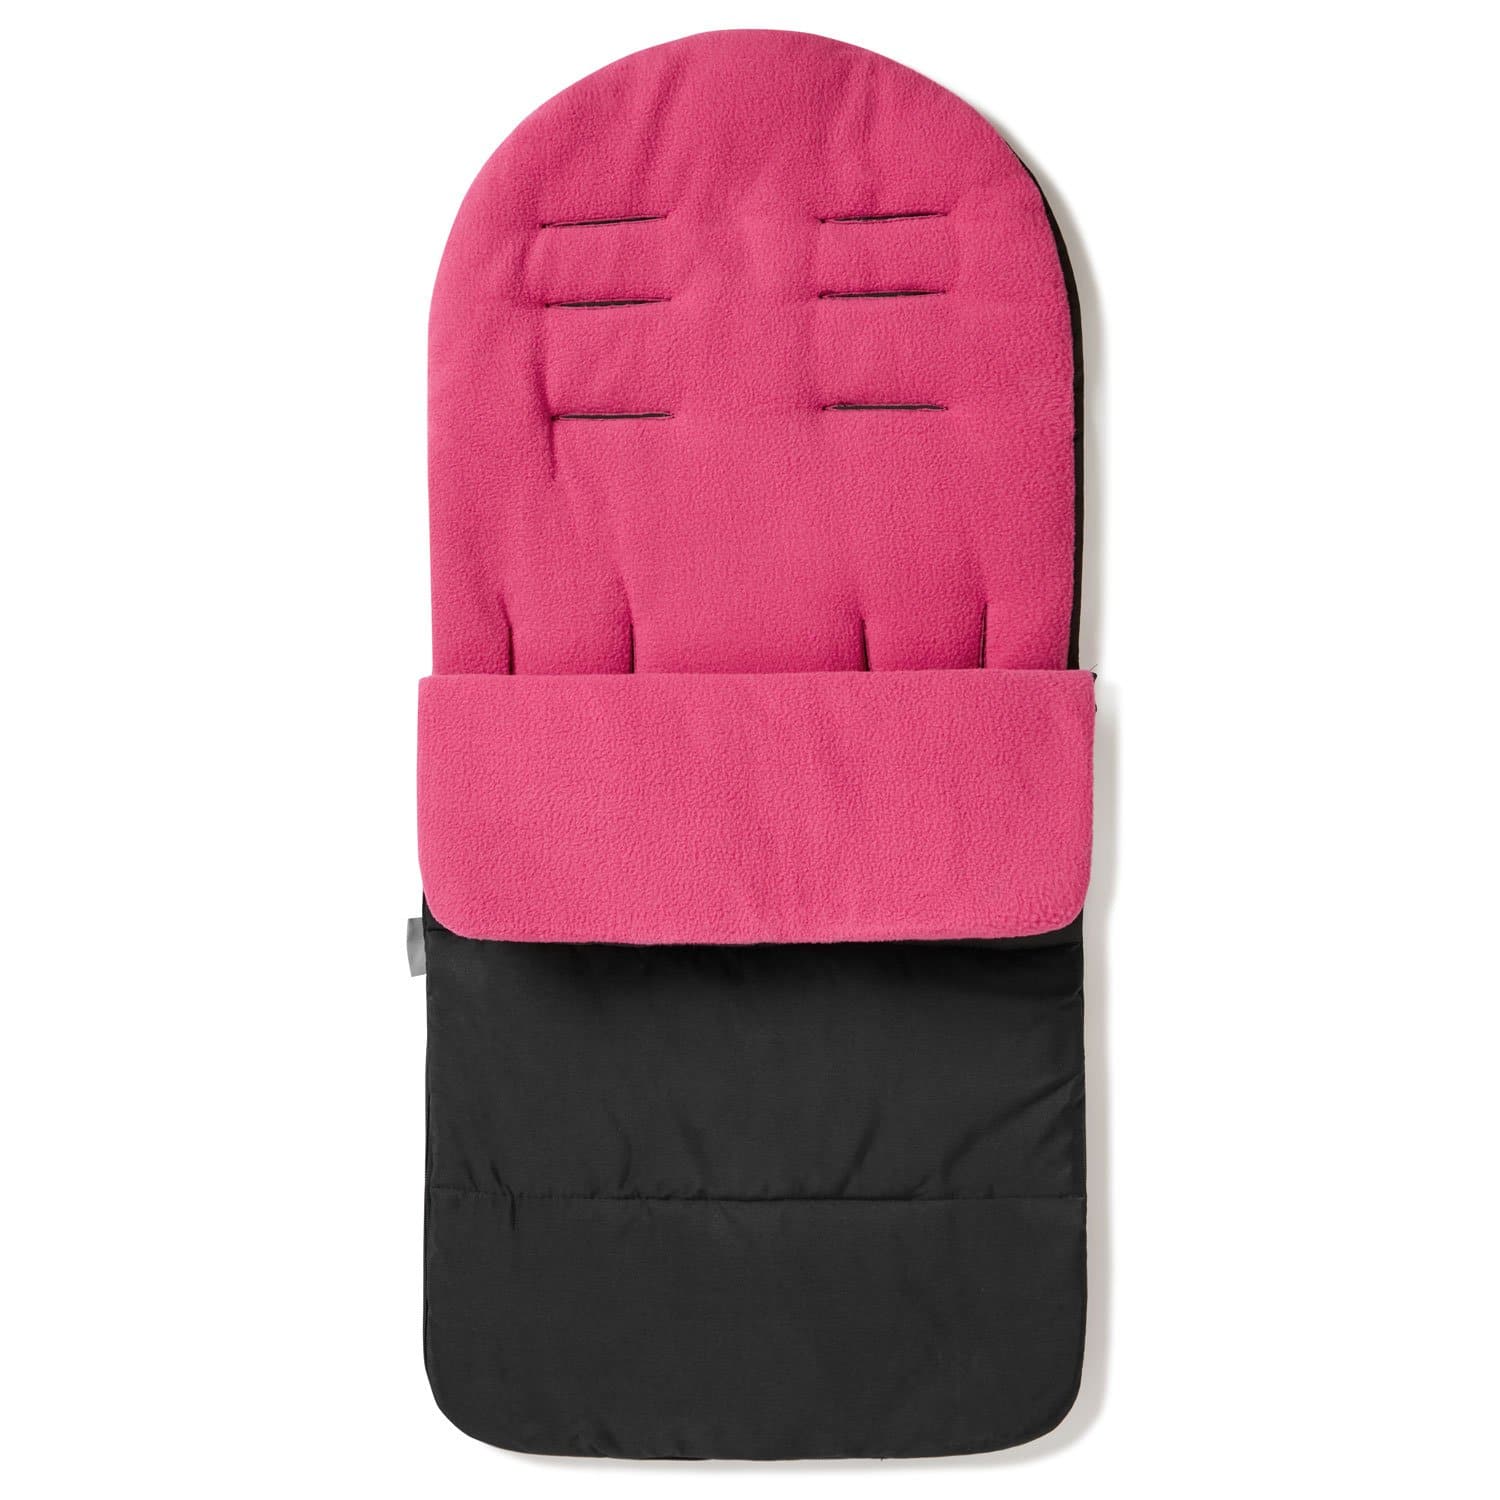 Premium Footmuff / Cosy Toes Compatible with Valco - Pink Rose / Fits All Models | For Your Little One